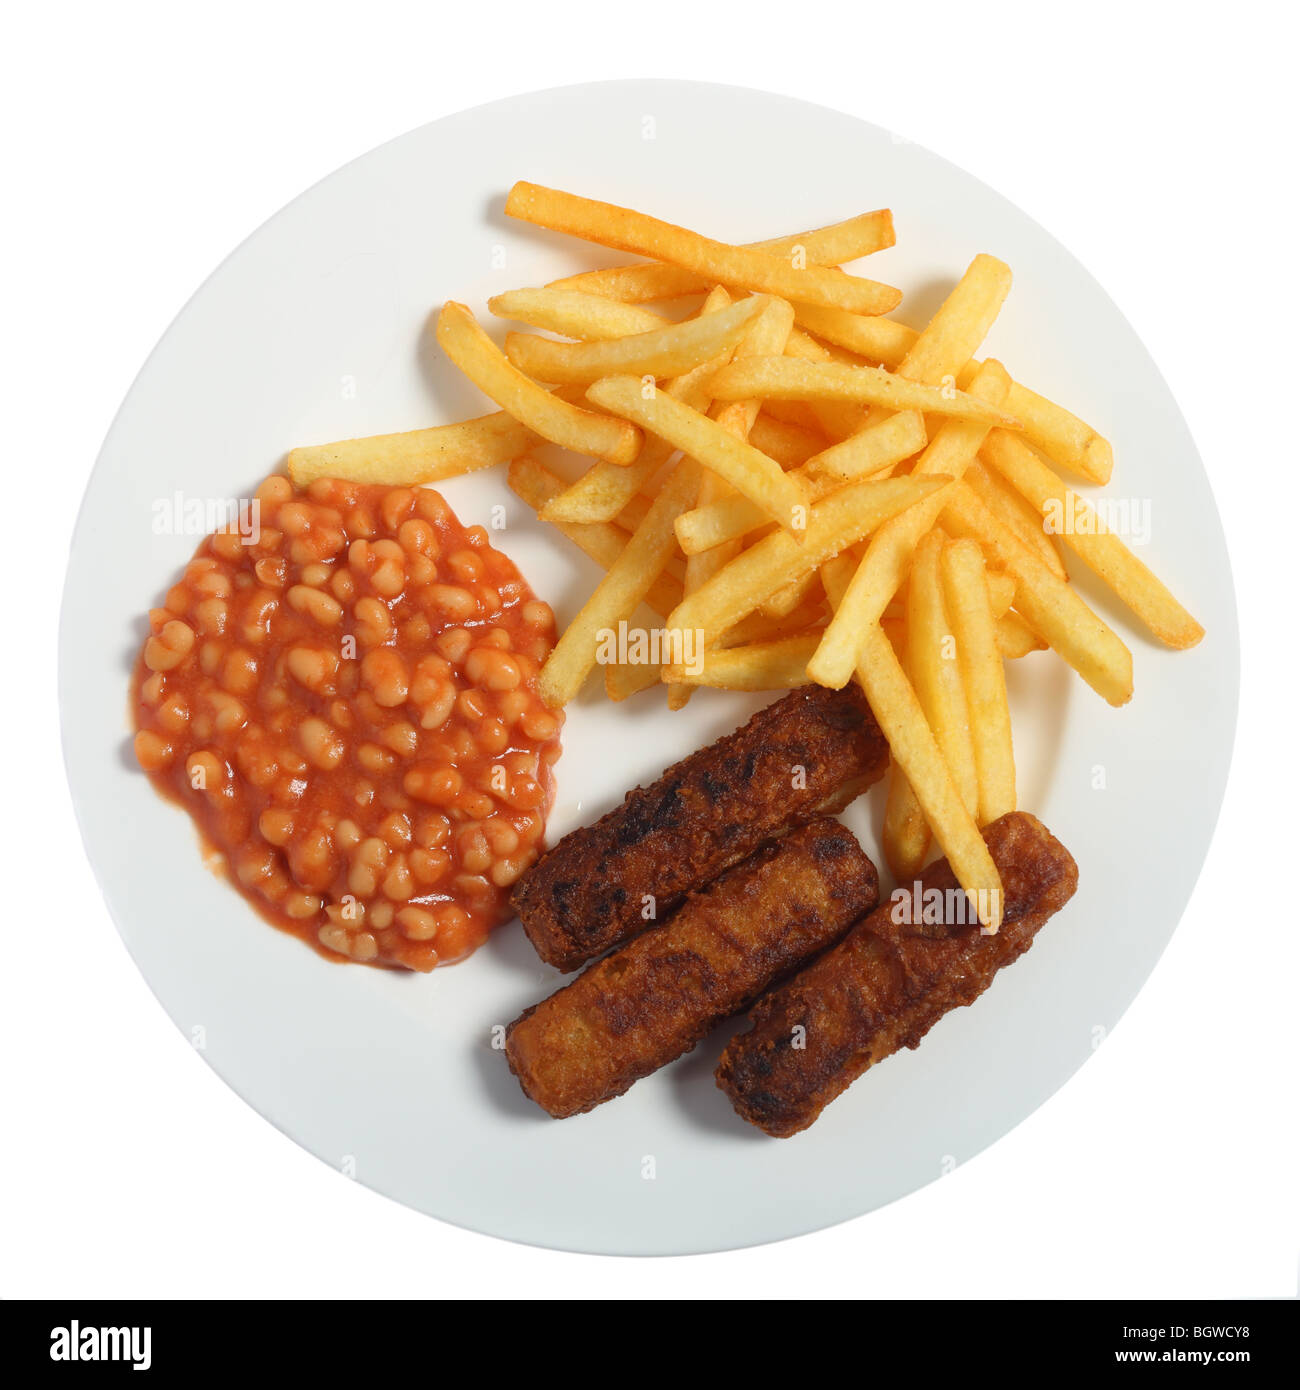 A typical English fast-food meal of fish fingers, beans and chips (french fries) Stock Photo